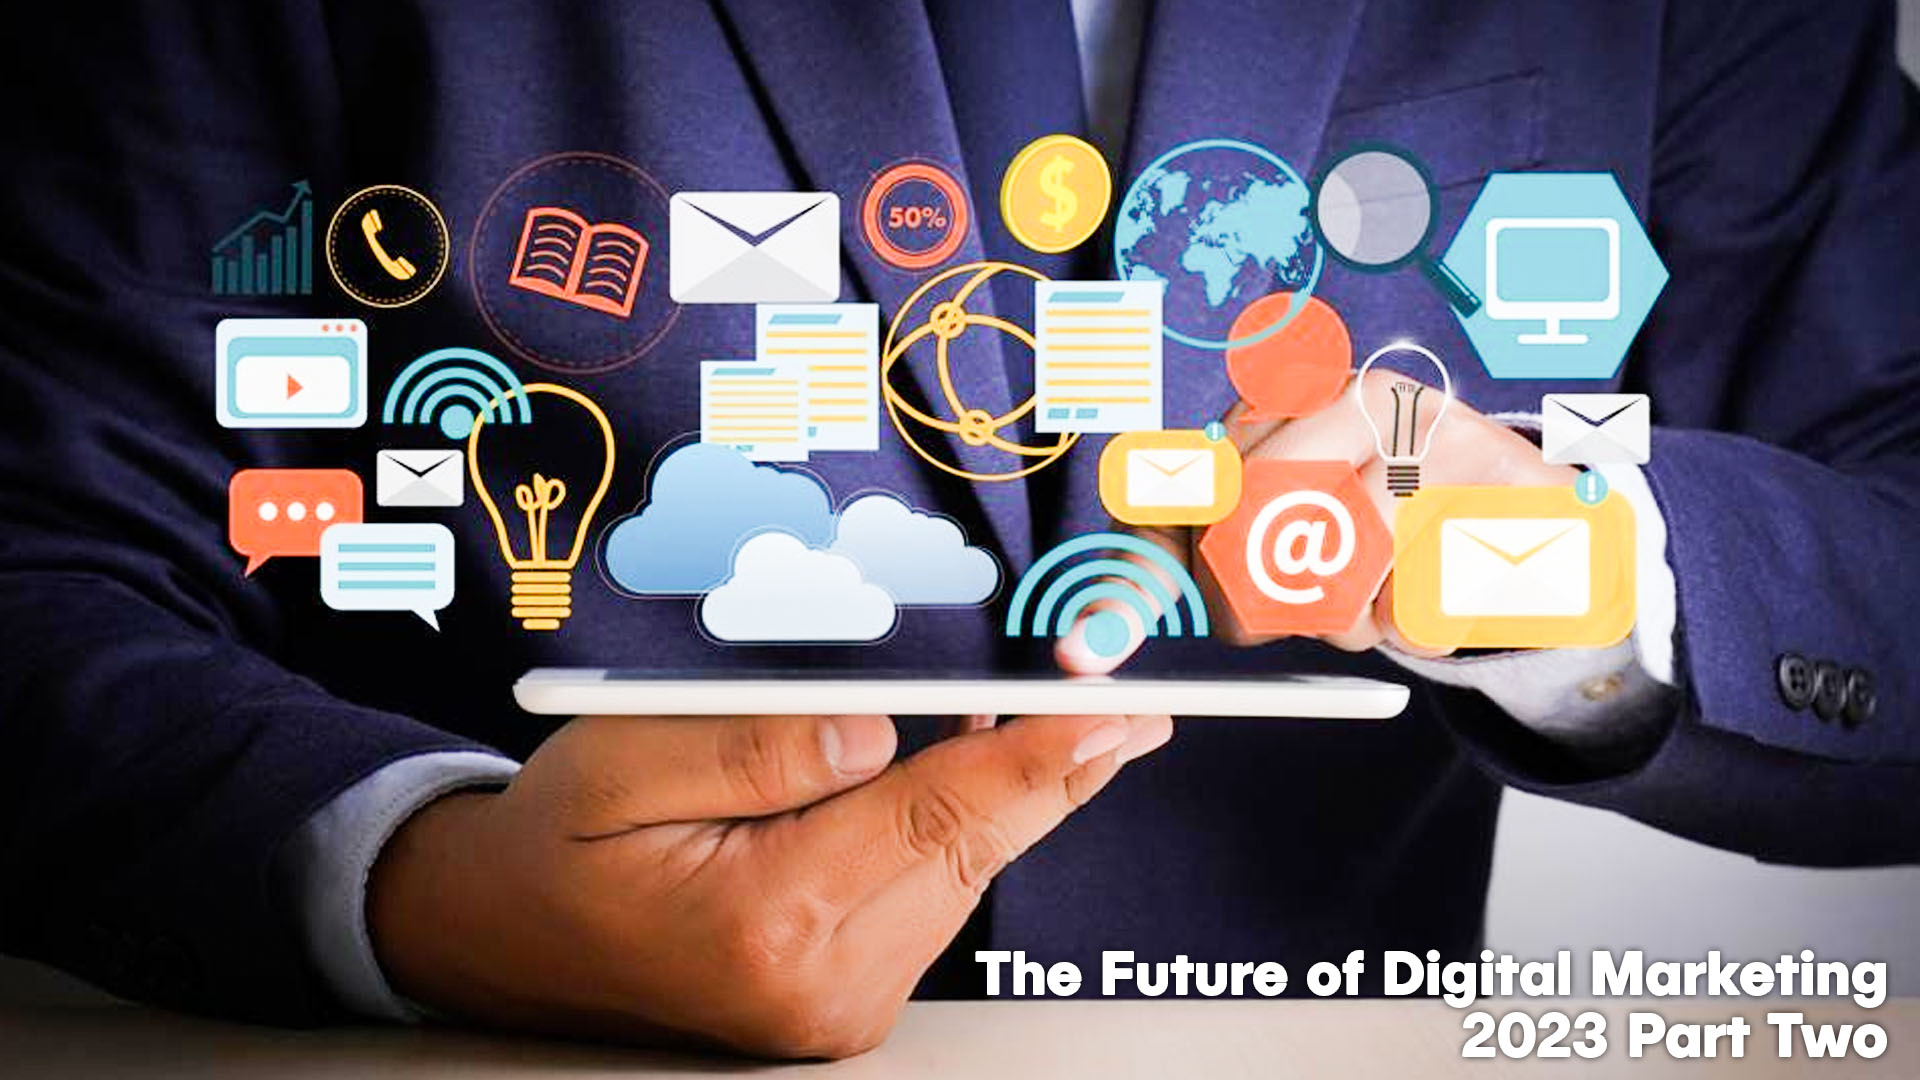 The Future of Digital Marketing 2023 Part Two